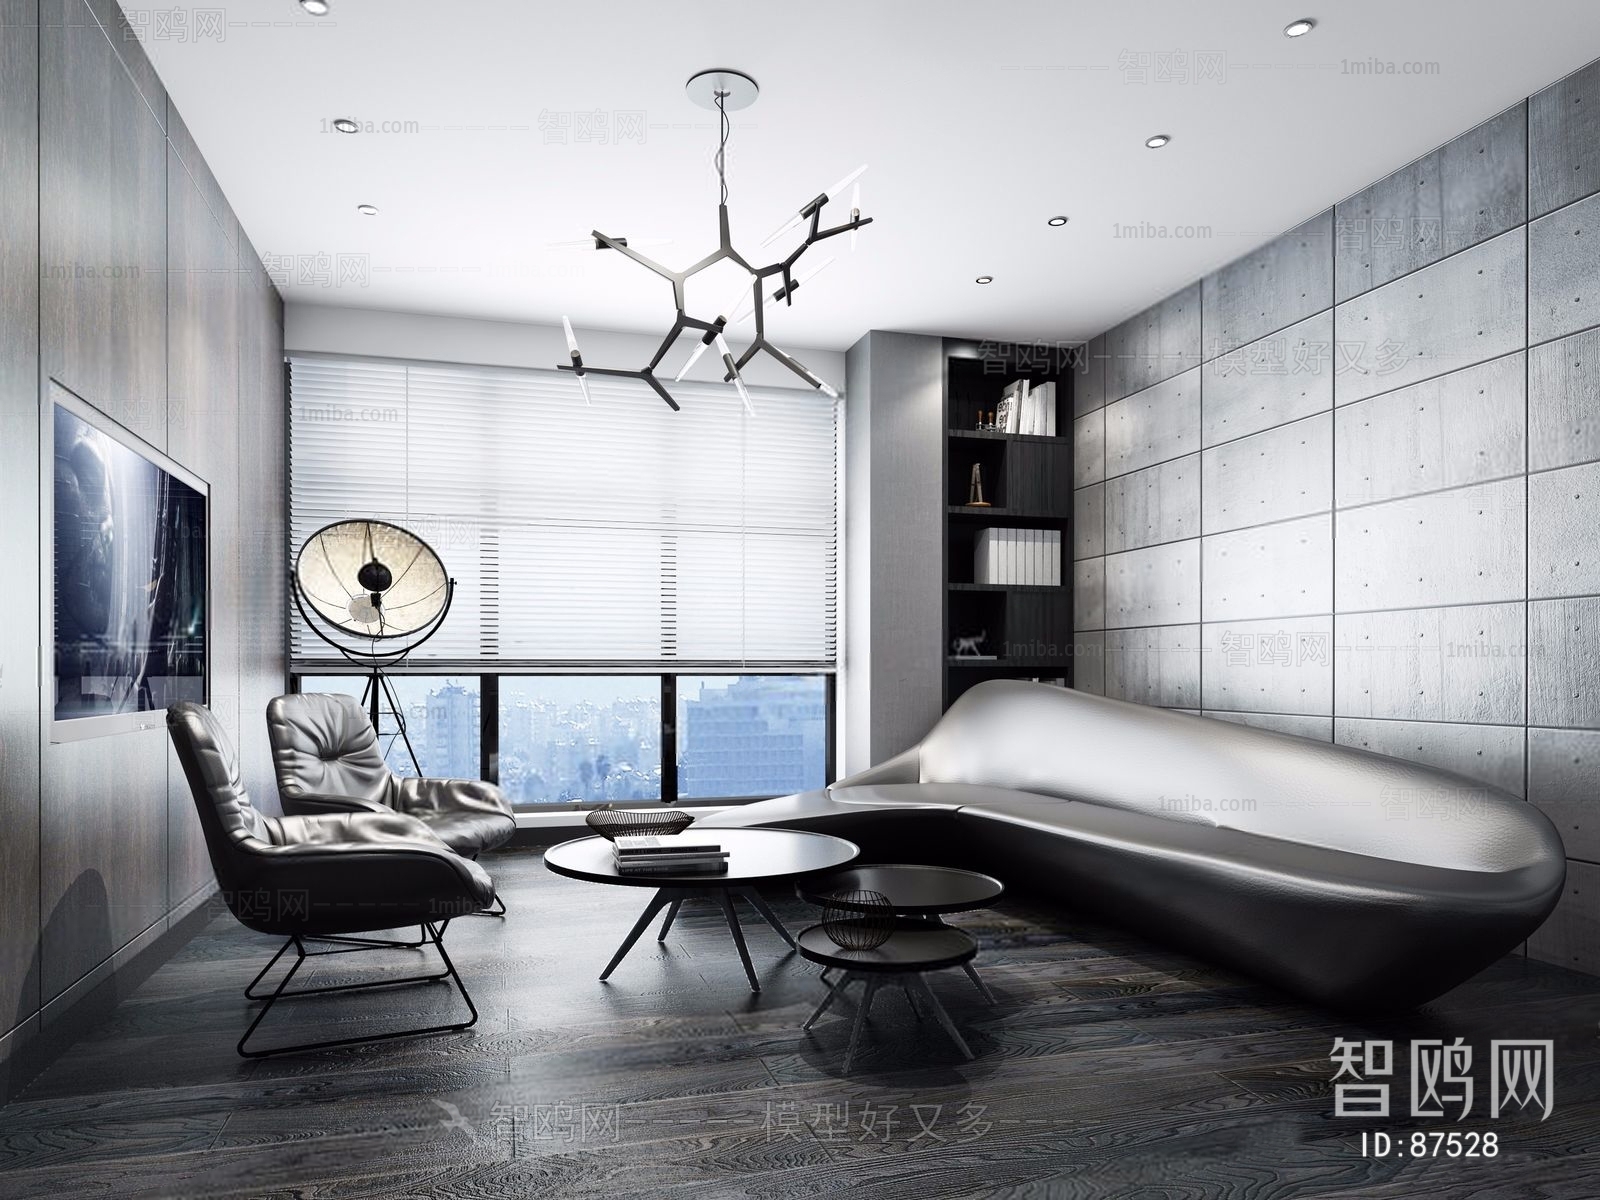 Modern Industrial Style Reception Room